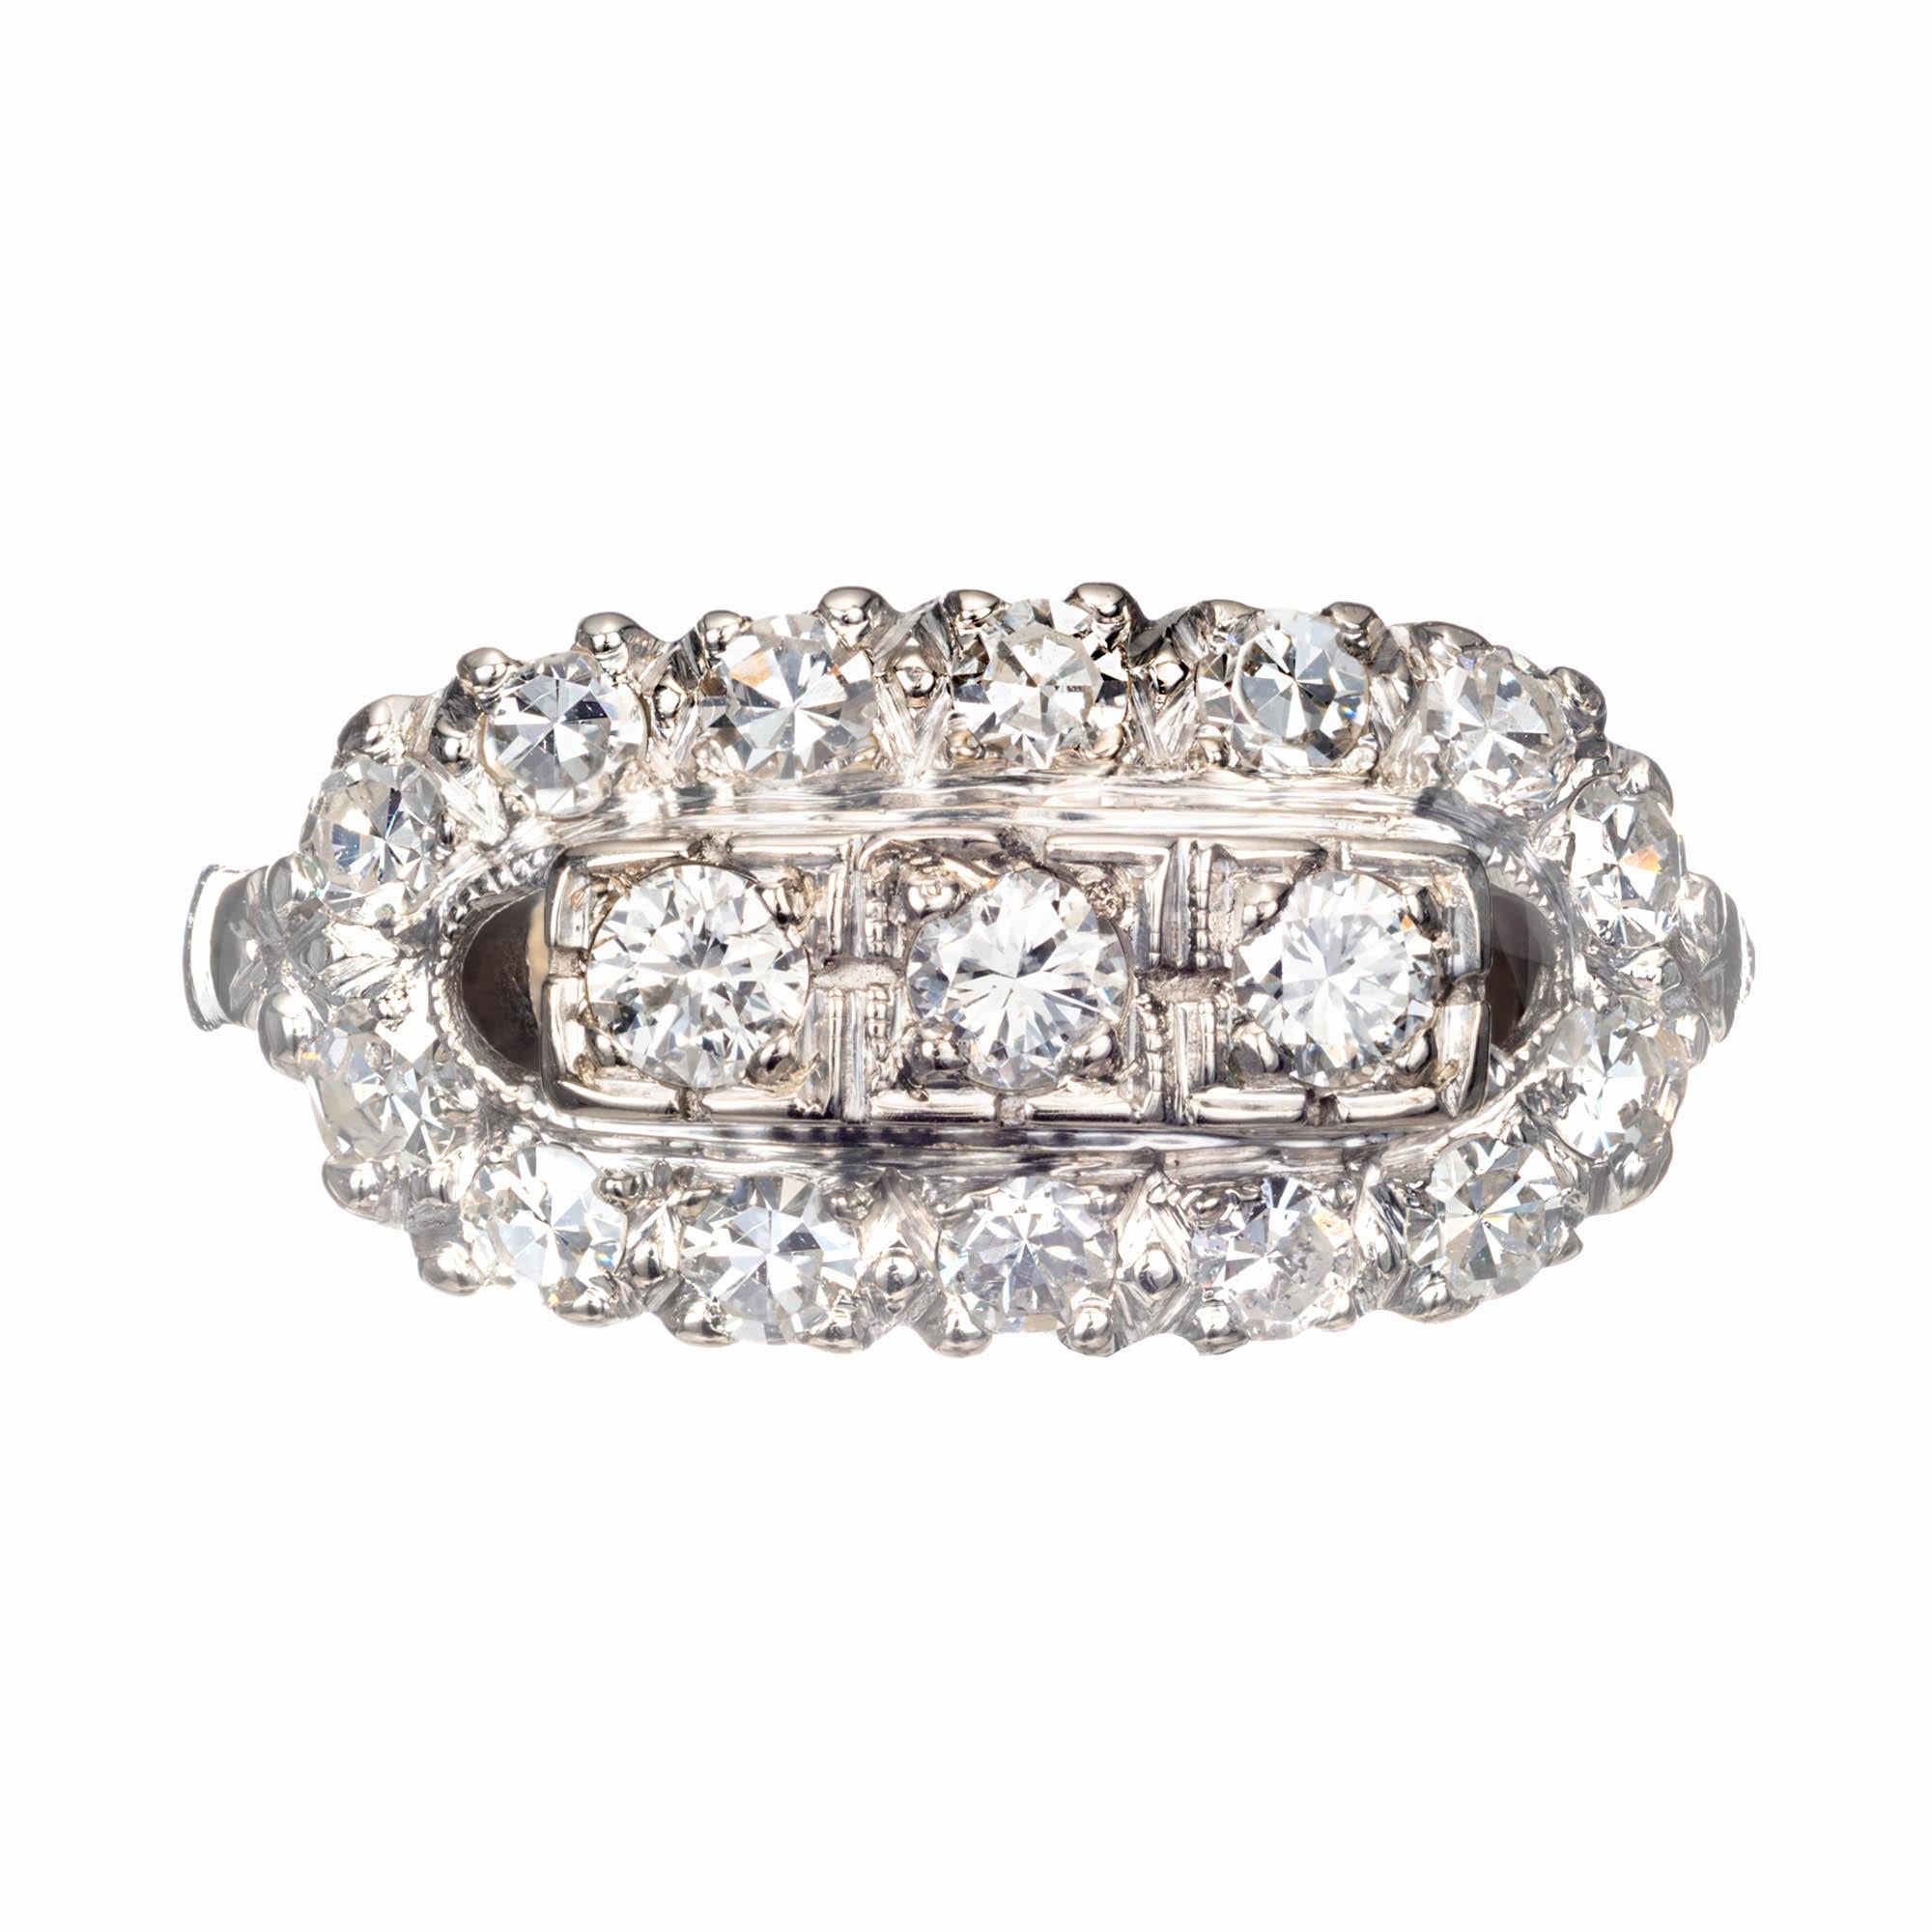 1.00 Carats diamond oval cluster ring. 3 diamonds surrounded by a halo of diamonds in a 14k white gold setting. 

3 round I SI diamonds, Approx. .30 carats
14 round single cut I VS-SI diamonds, Approx. .70 carats 
Size 7 and sizable.  up to